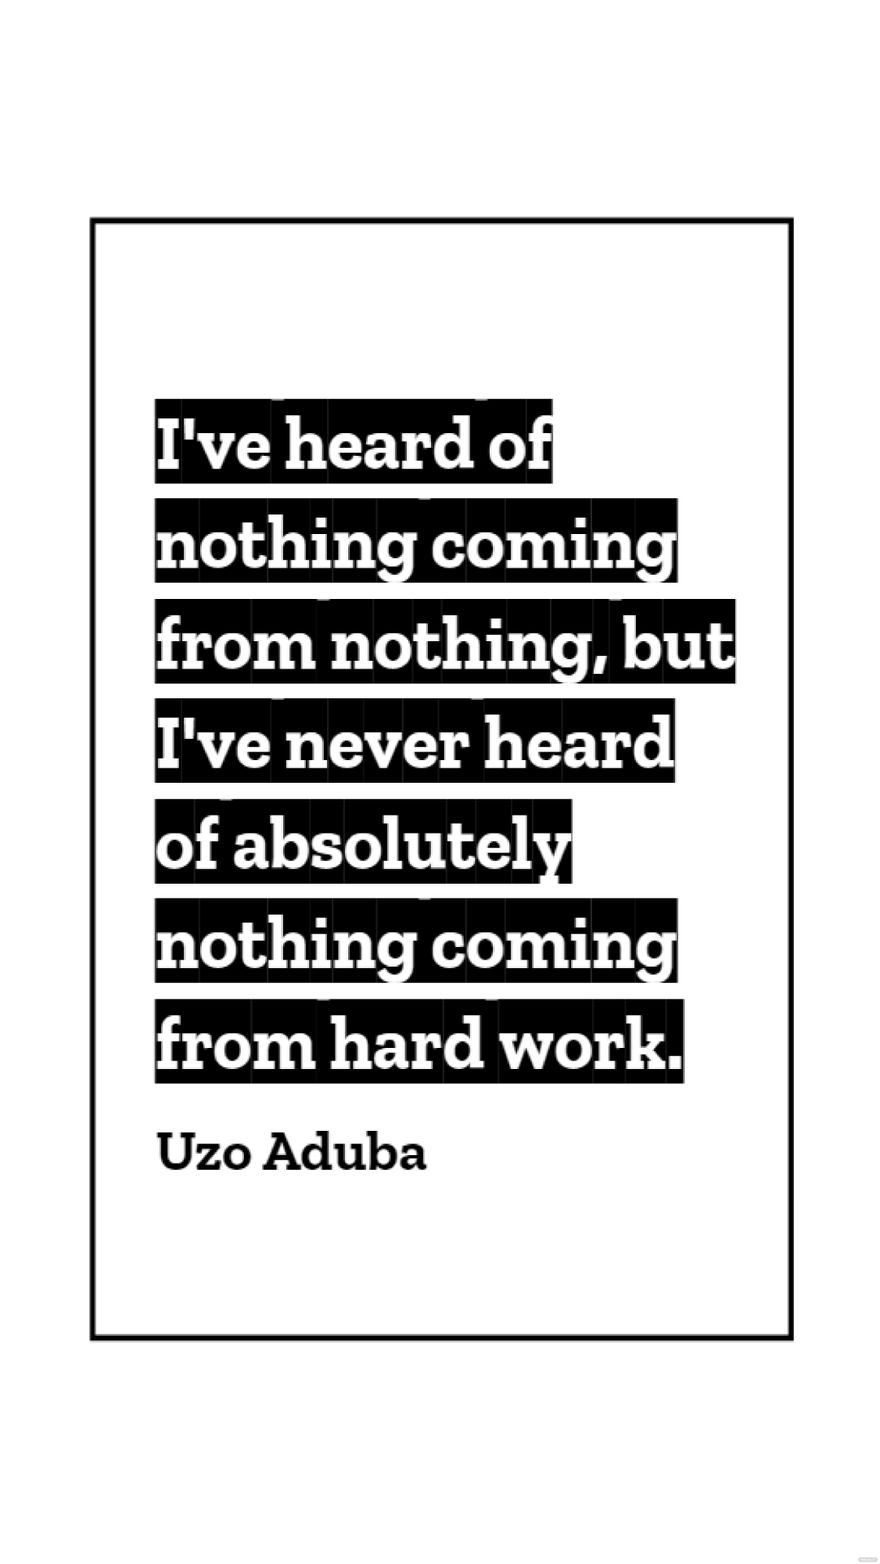 Uzo Aduba - I've heard of nothing coming from nothing, but I've never heard of absolutely nothing coming from hard work.